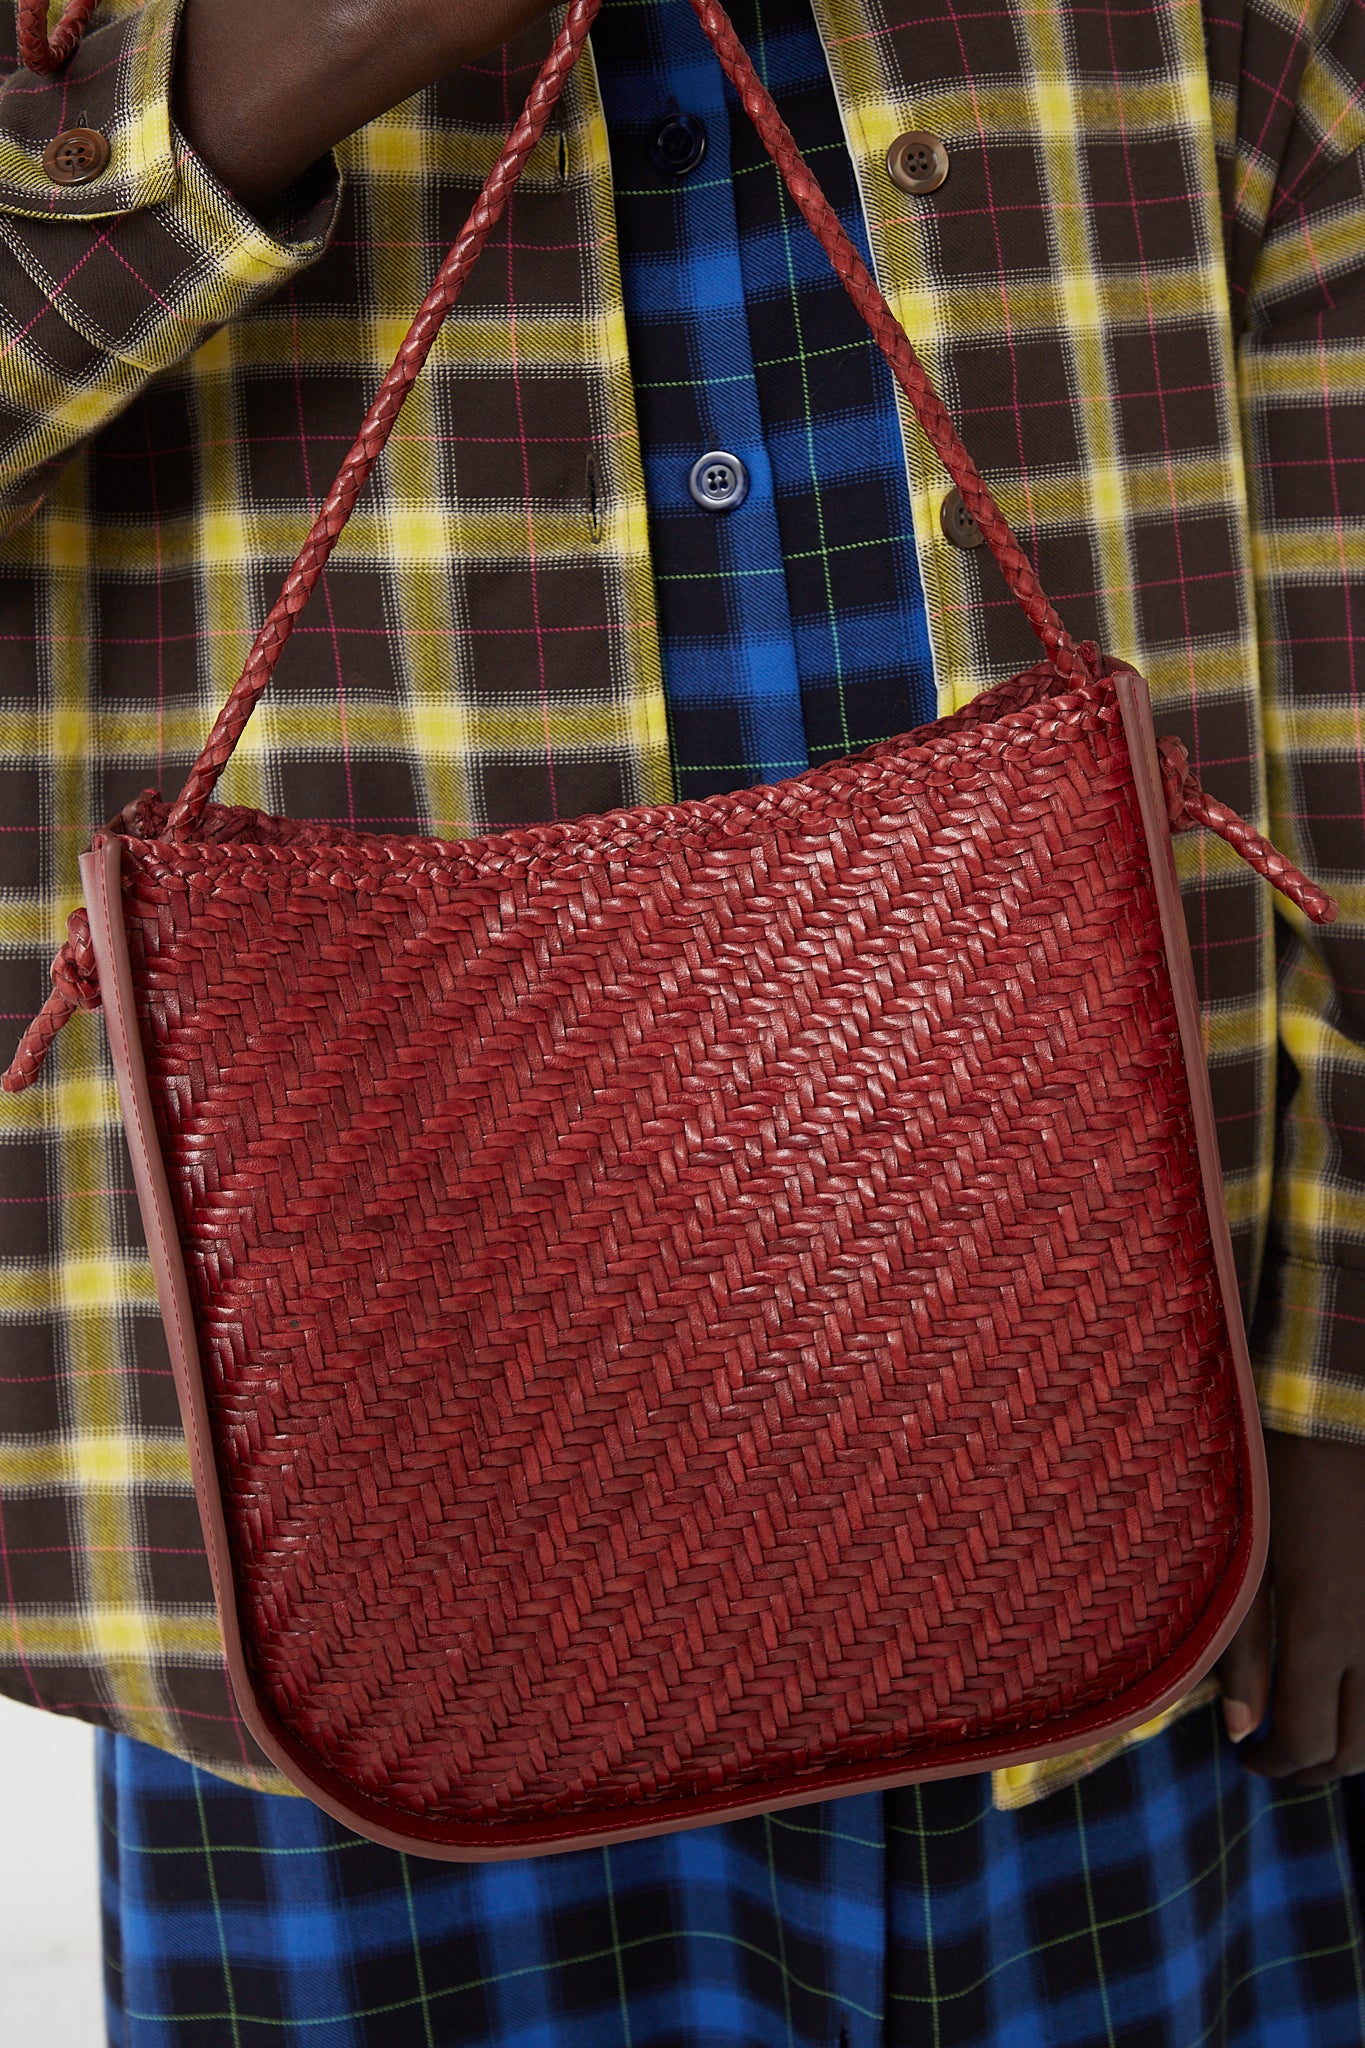 The woman is holding a red Dragon Diffusion Wanaka Crossbody Bag in Bordo.